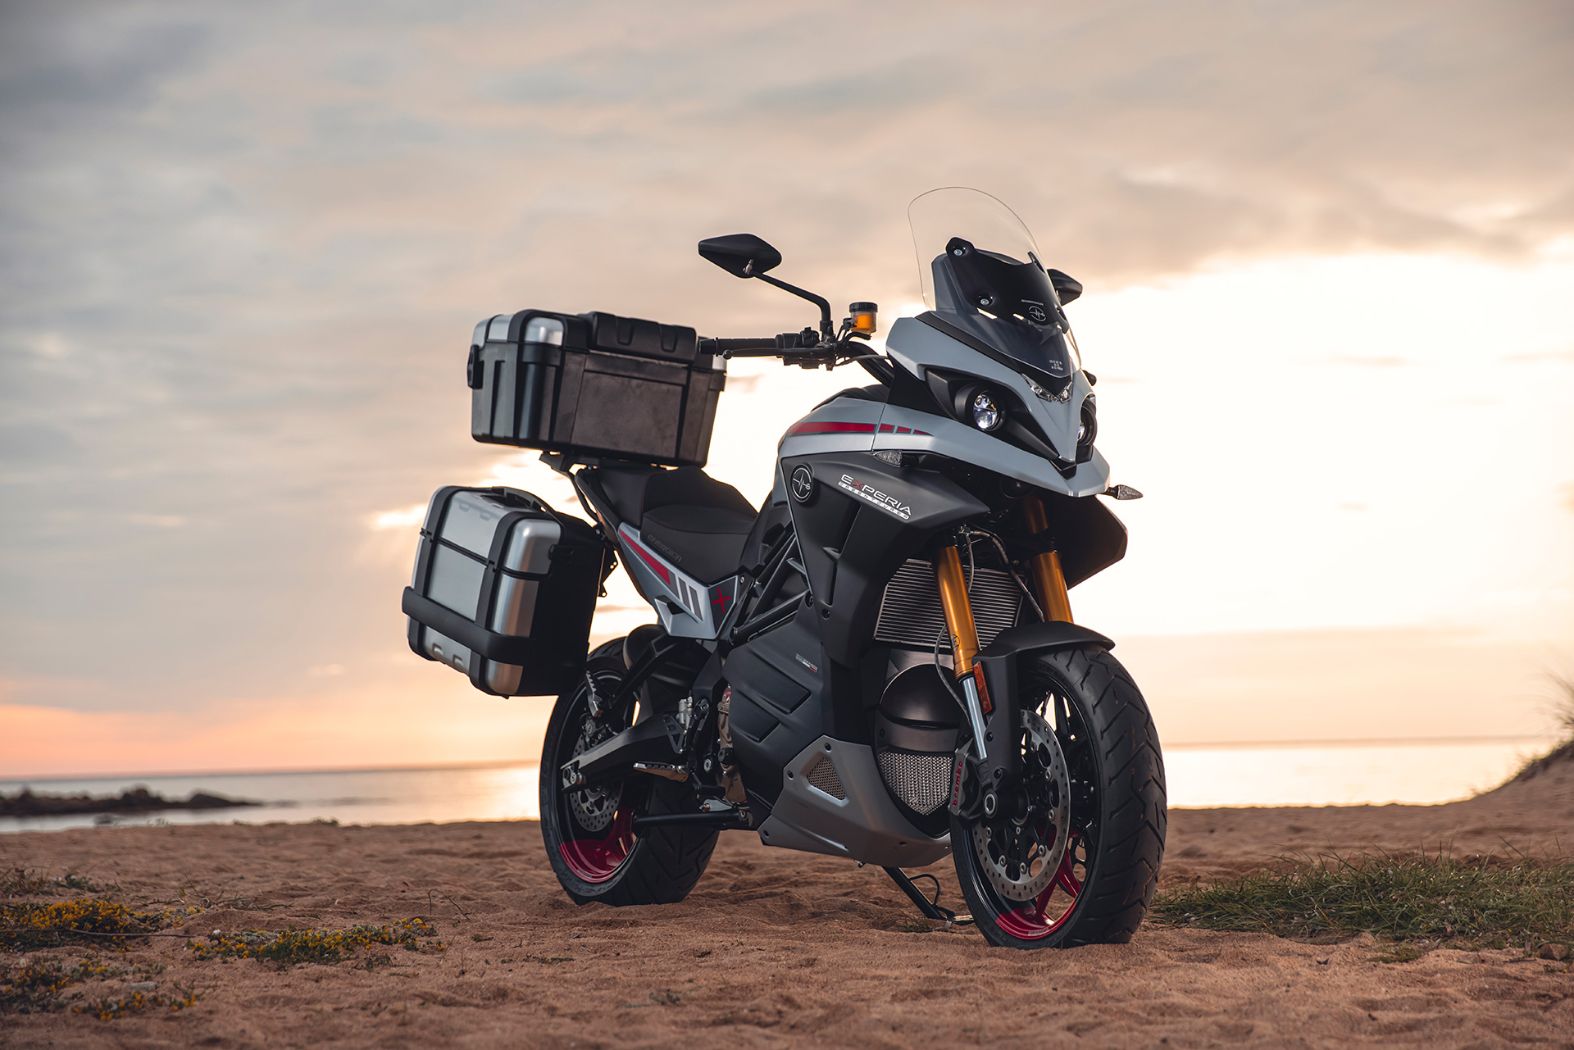 MIC Sets Standard for Measuring Freeway Range for Electric Motorcycles - Motorcycle.com News